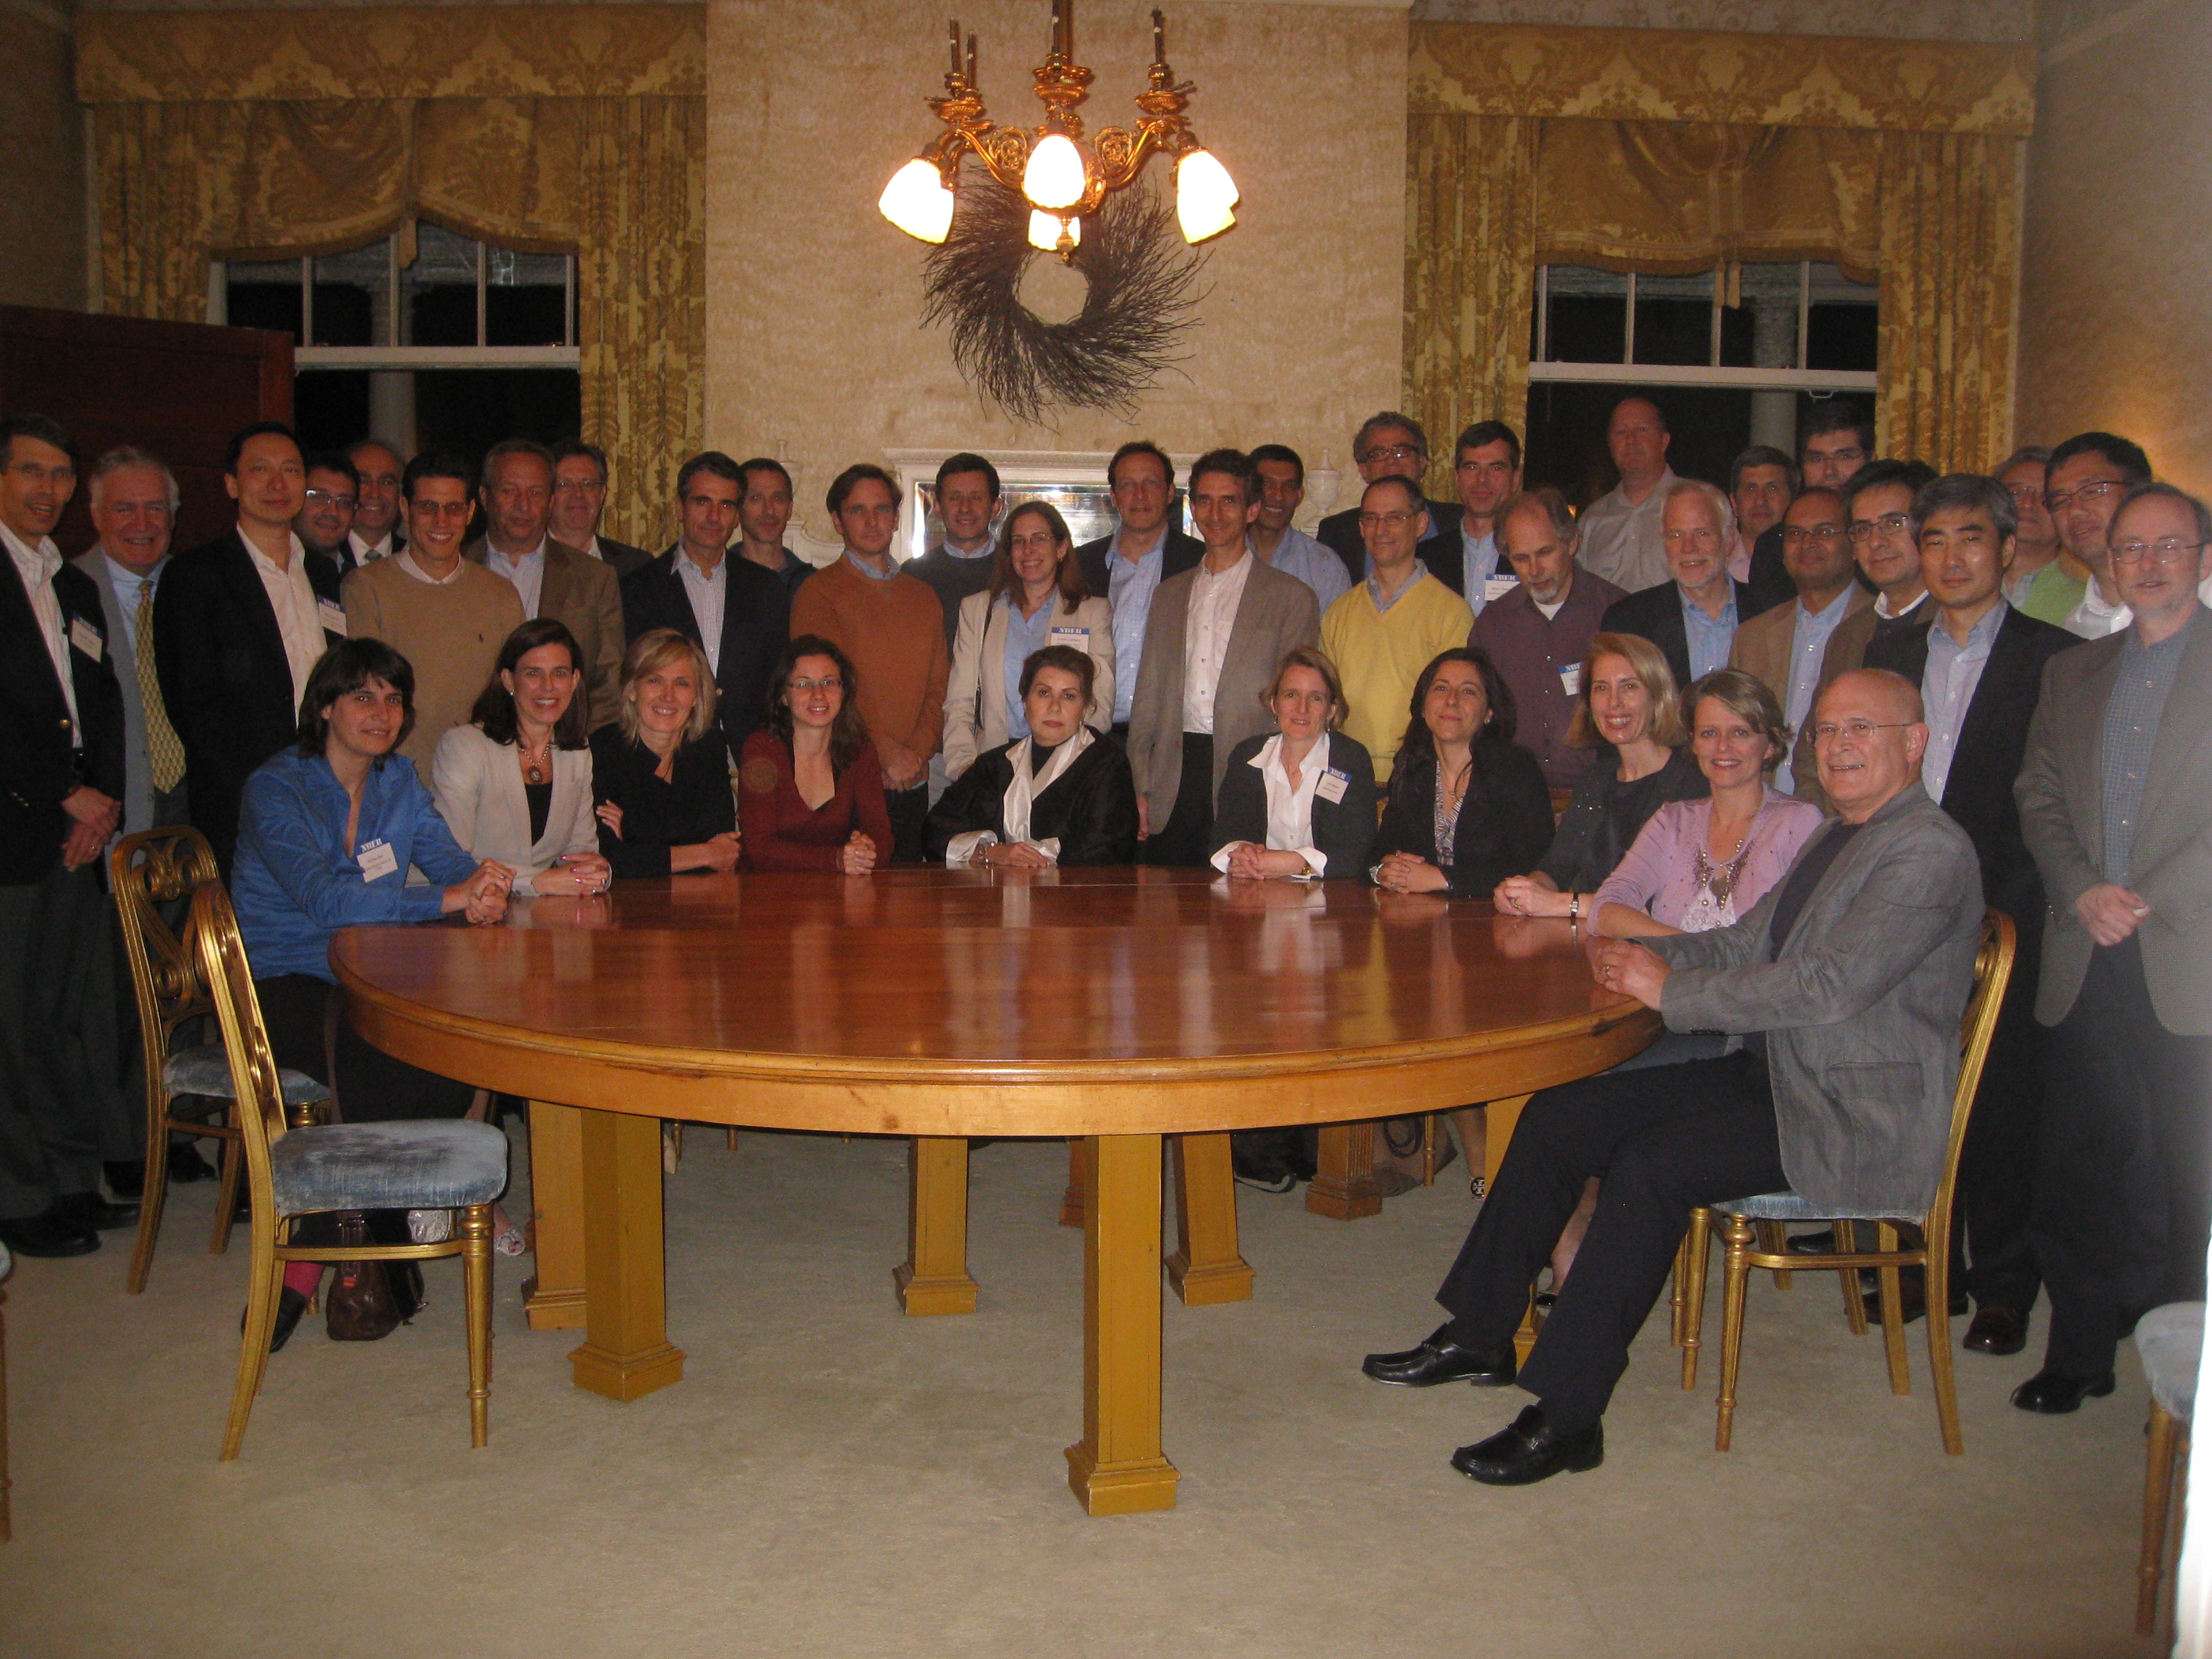 Conference participants in the Gold Room at the Mt. Washington Hotel 
(where the 1944 treaty was signed)
